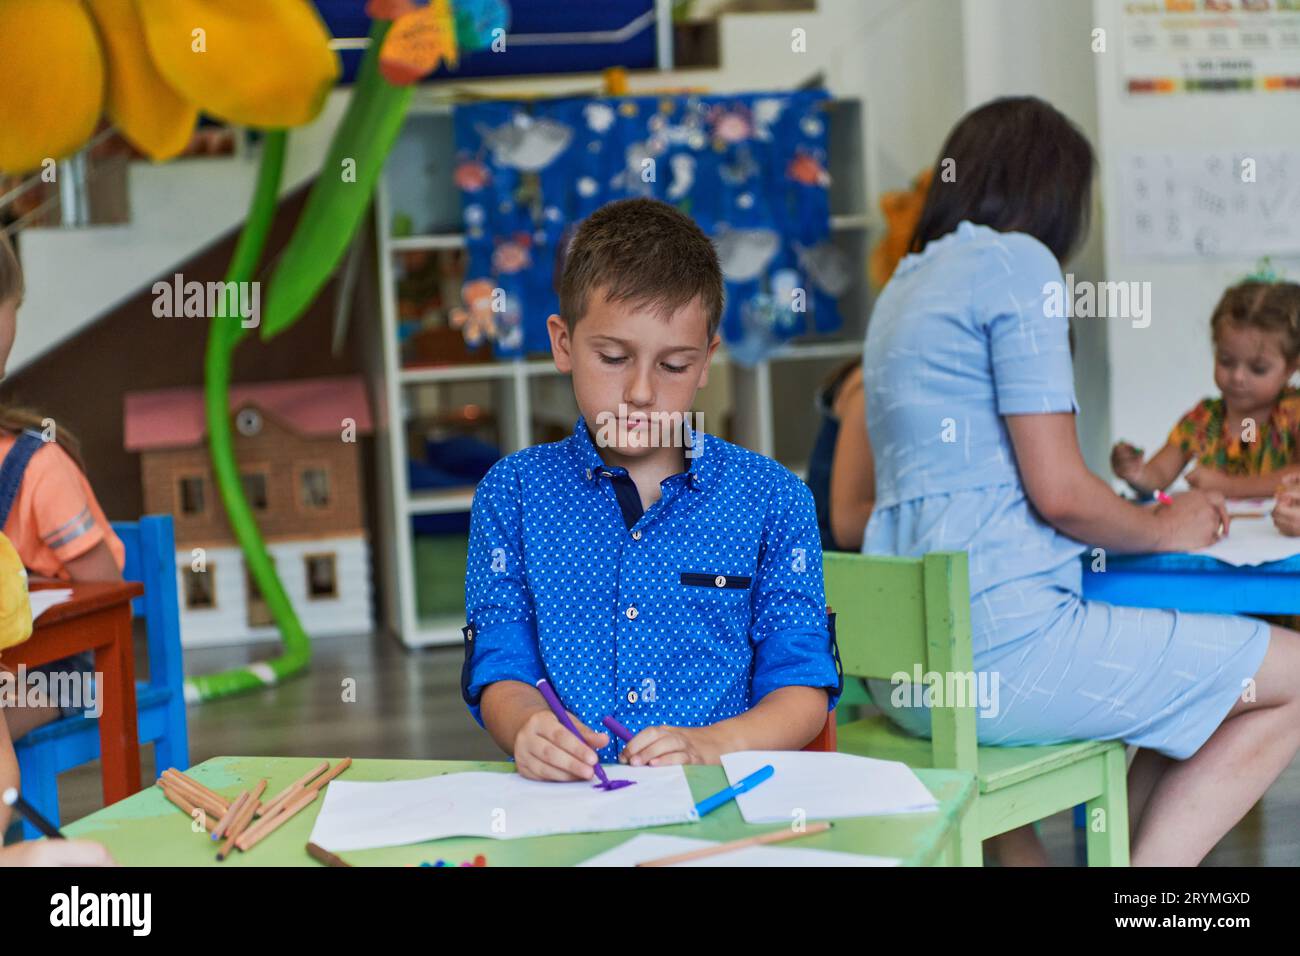 Creative kids during an art class in a daycare center or elementary school classroom drawing with female teacher. Stock Photo